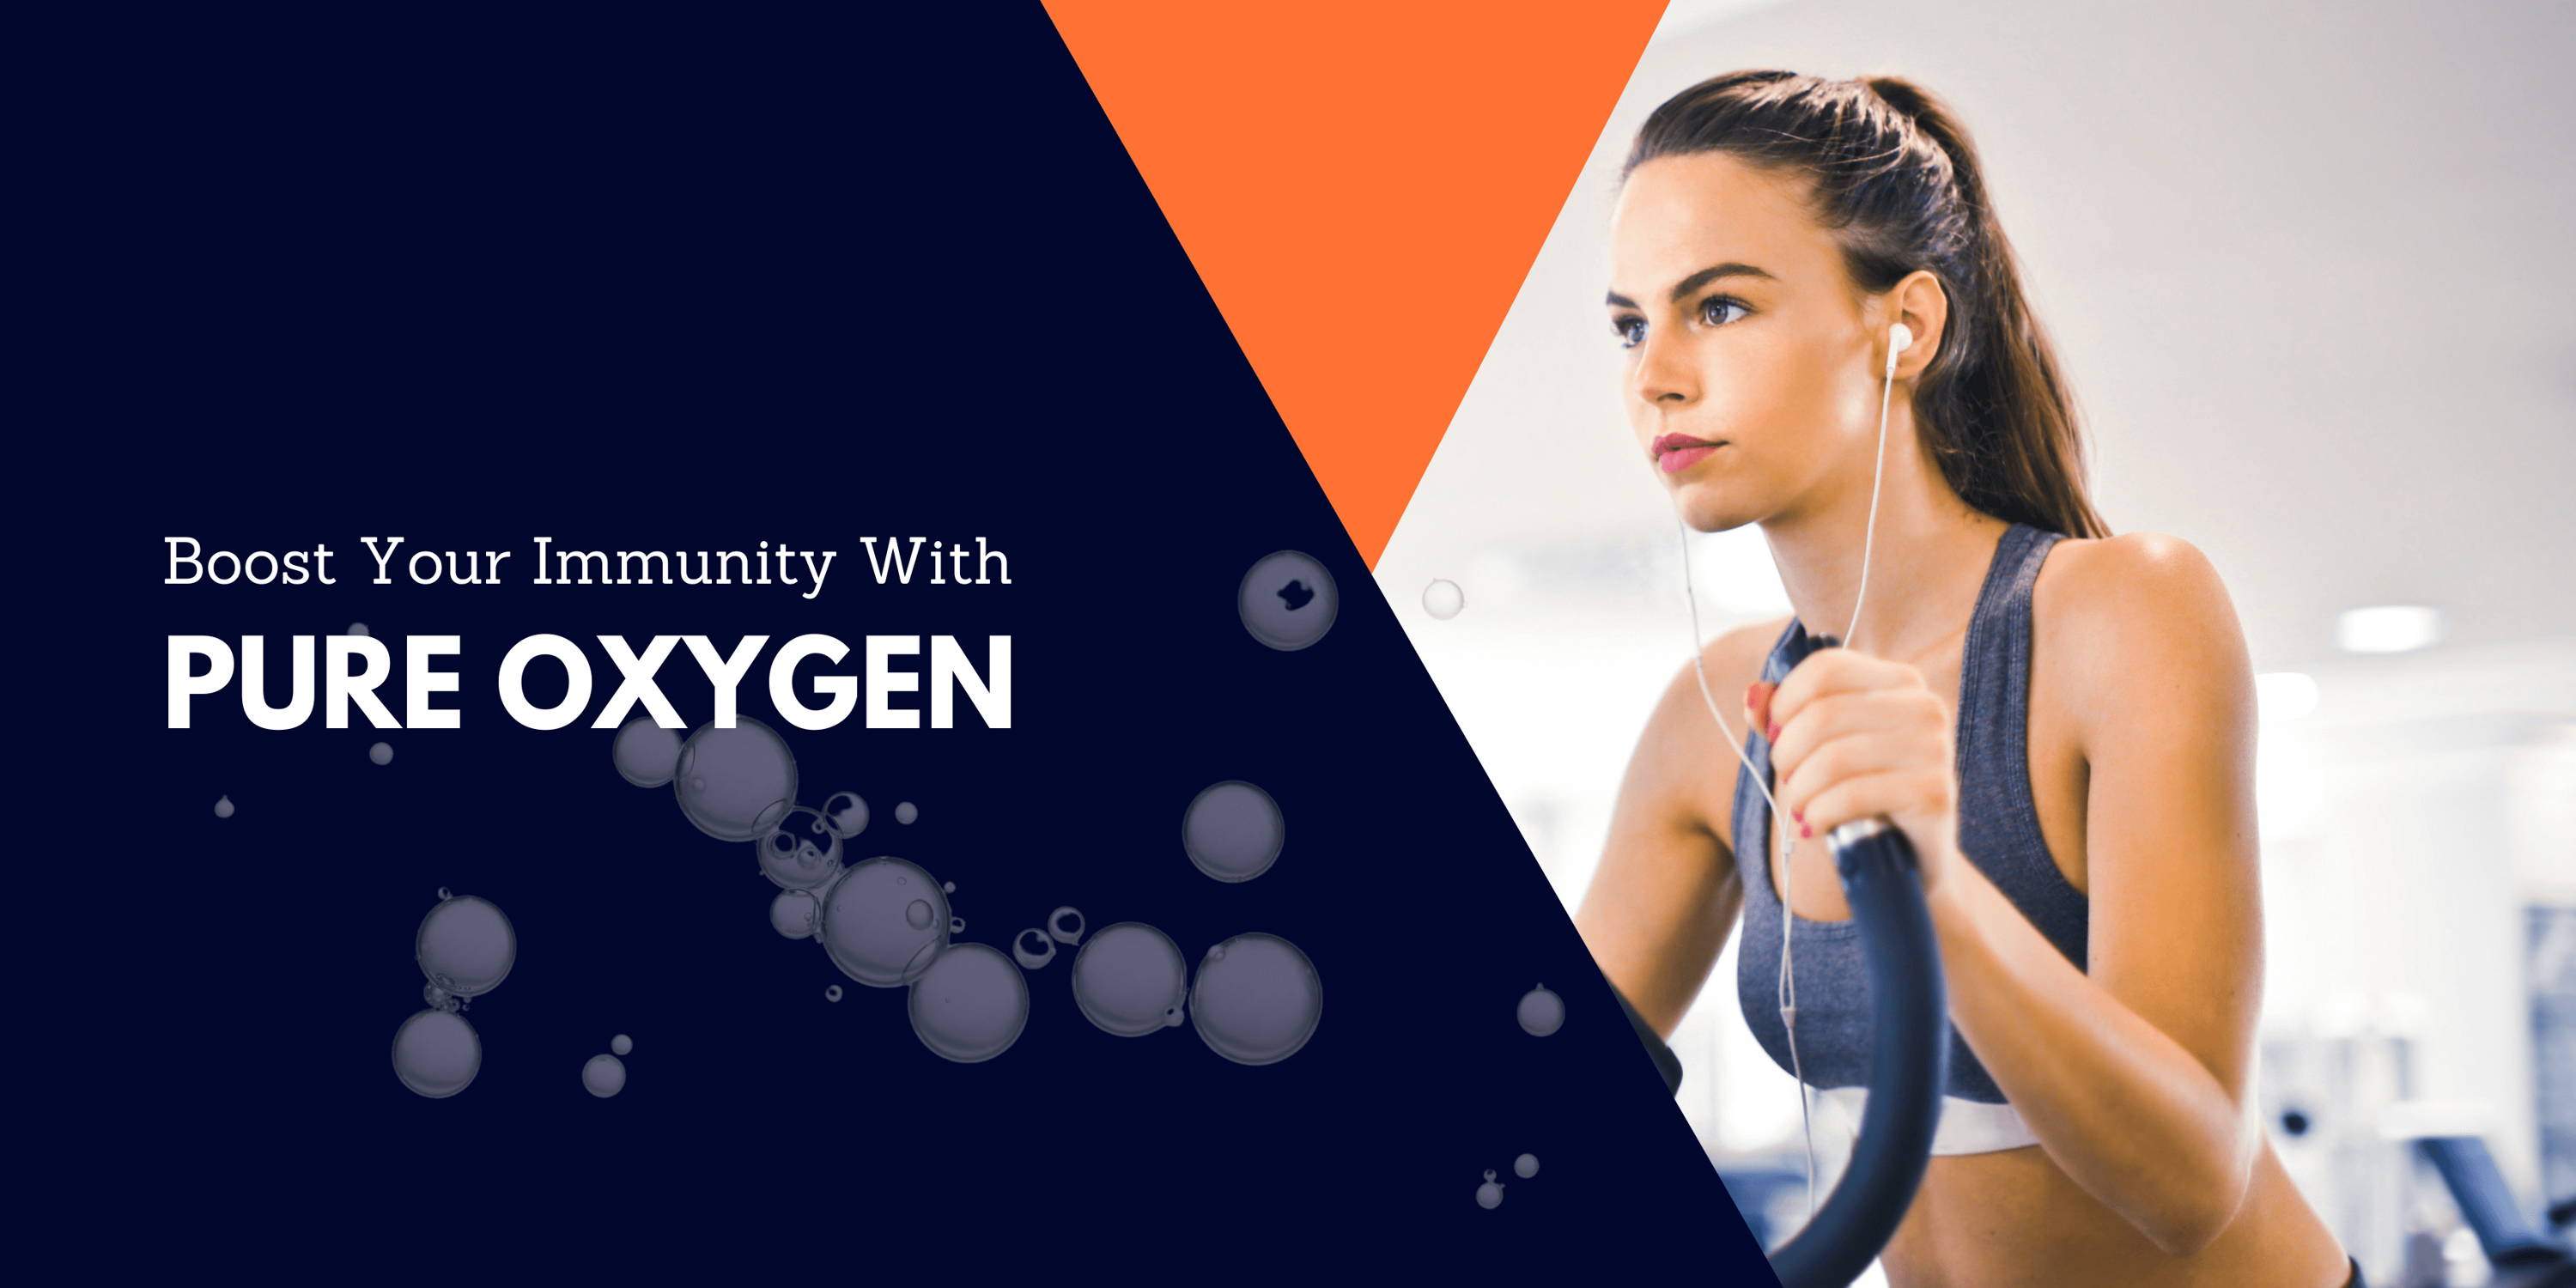 Boost Your Immunity with Pure Oxygen